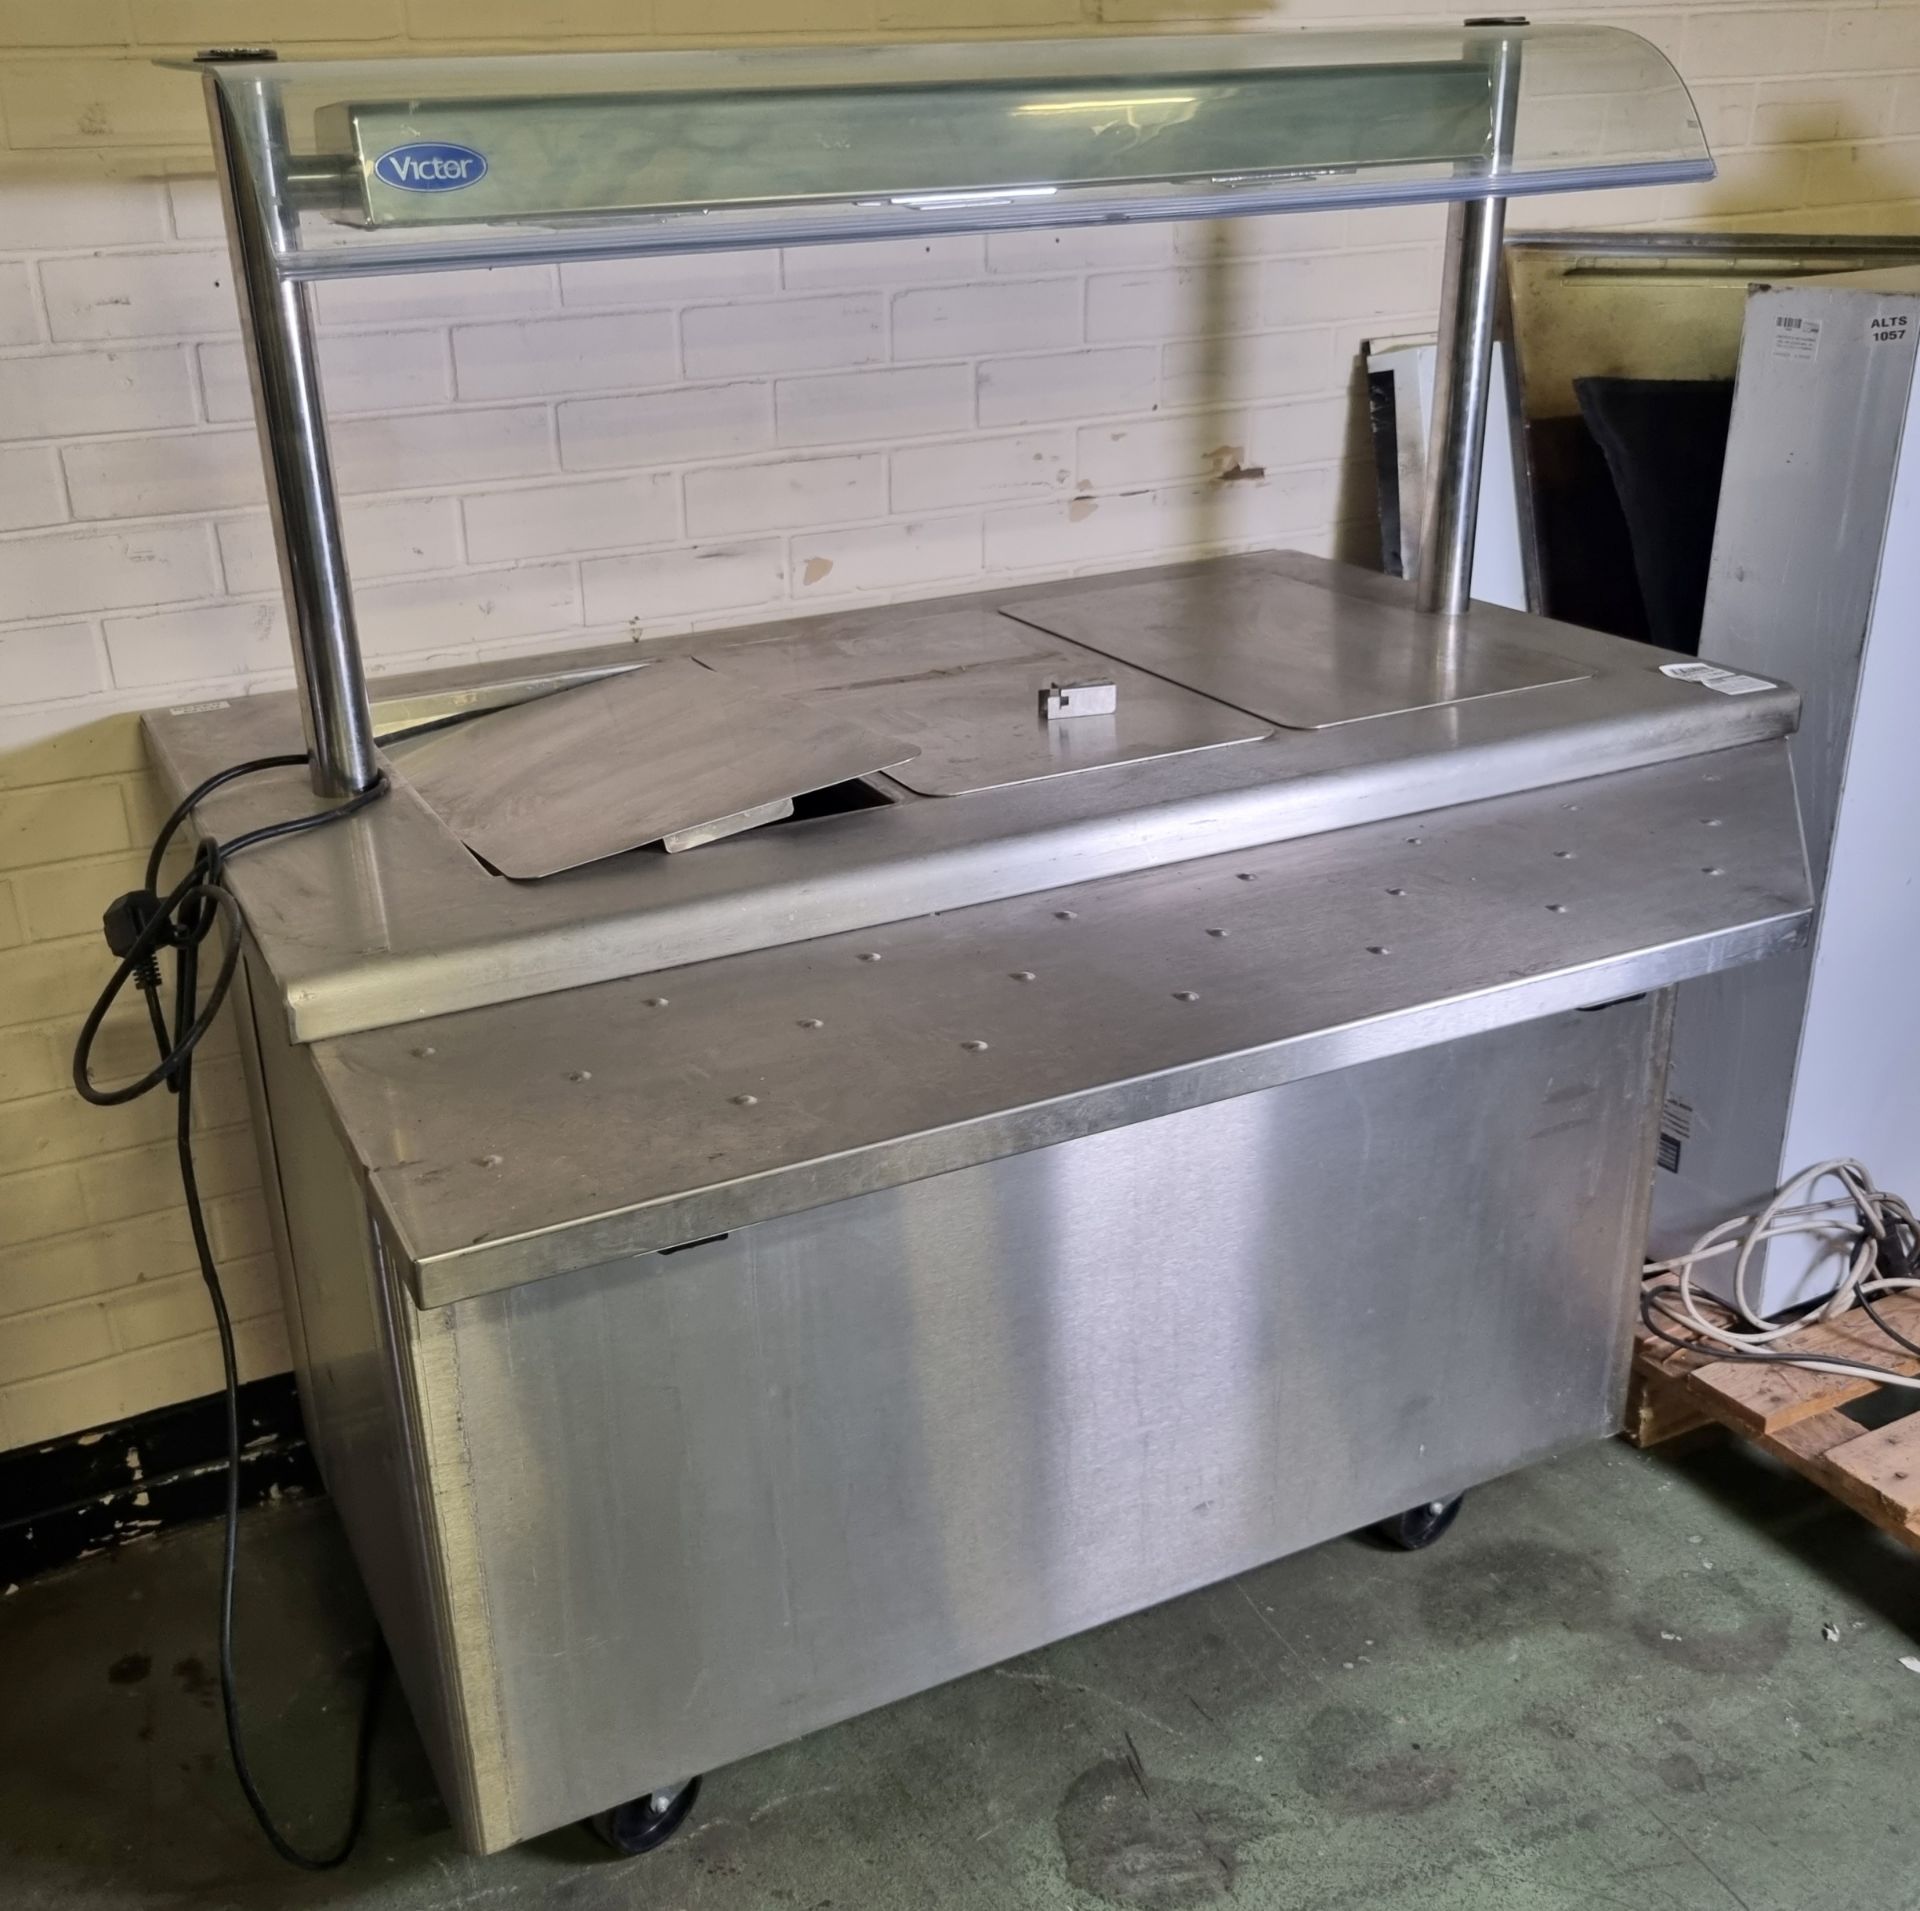 Victor SCEP12Z-42(S) hot plate server - 250V - L 1370 x W 1000 x H 1460mm - Image 4 of 4